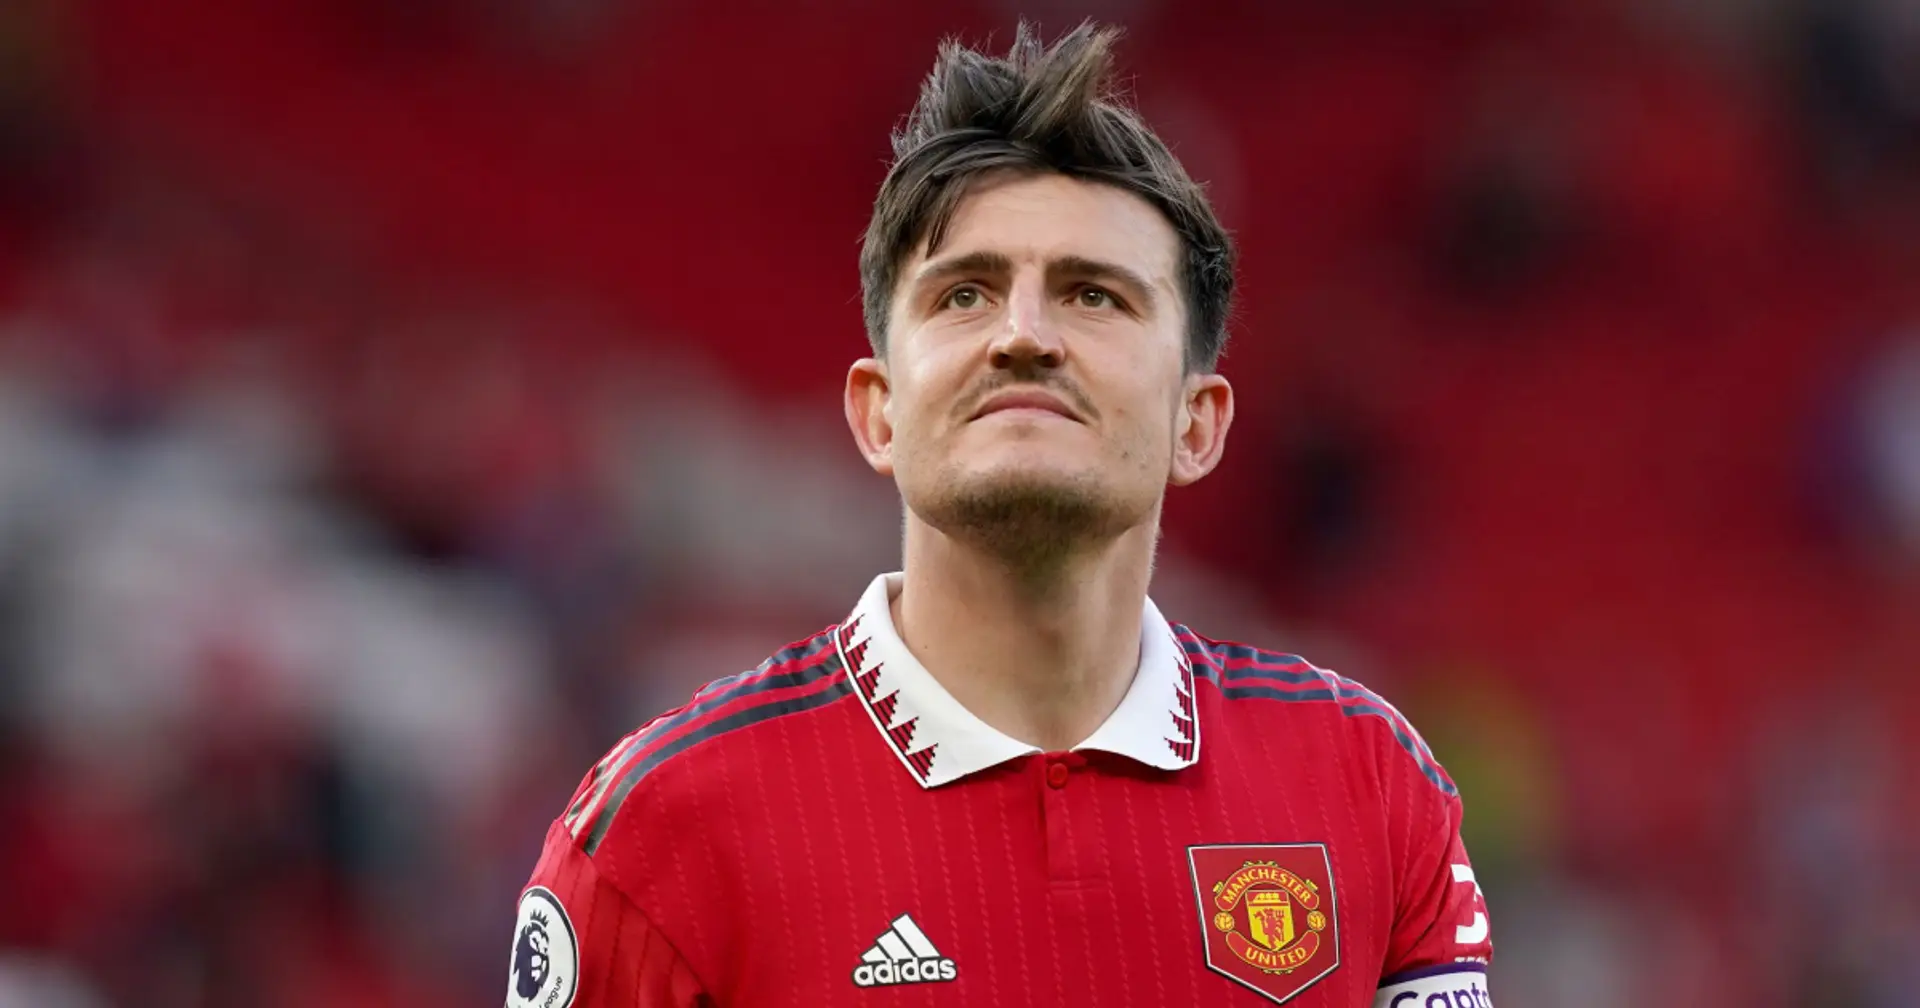 Daily Mail: Harry Maguire ready to snub West Ham and fight for Man United place (reliability: 4 stars)